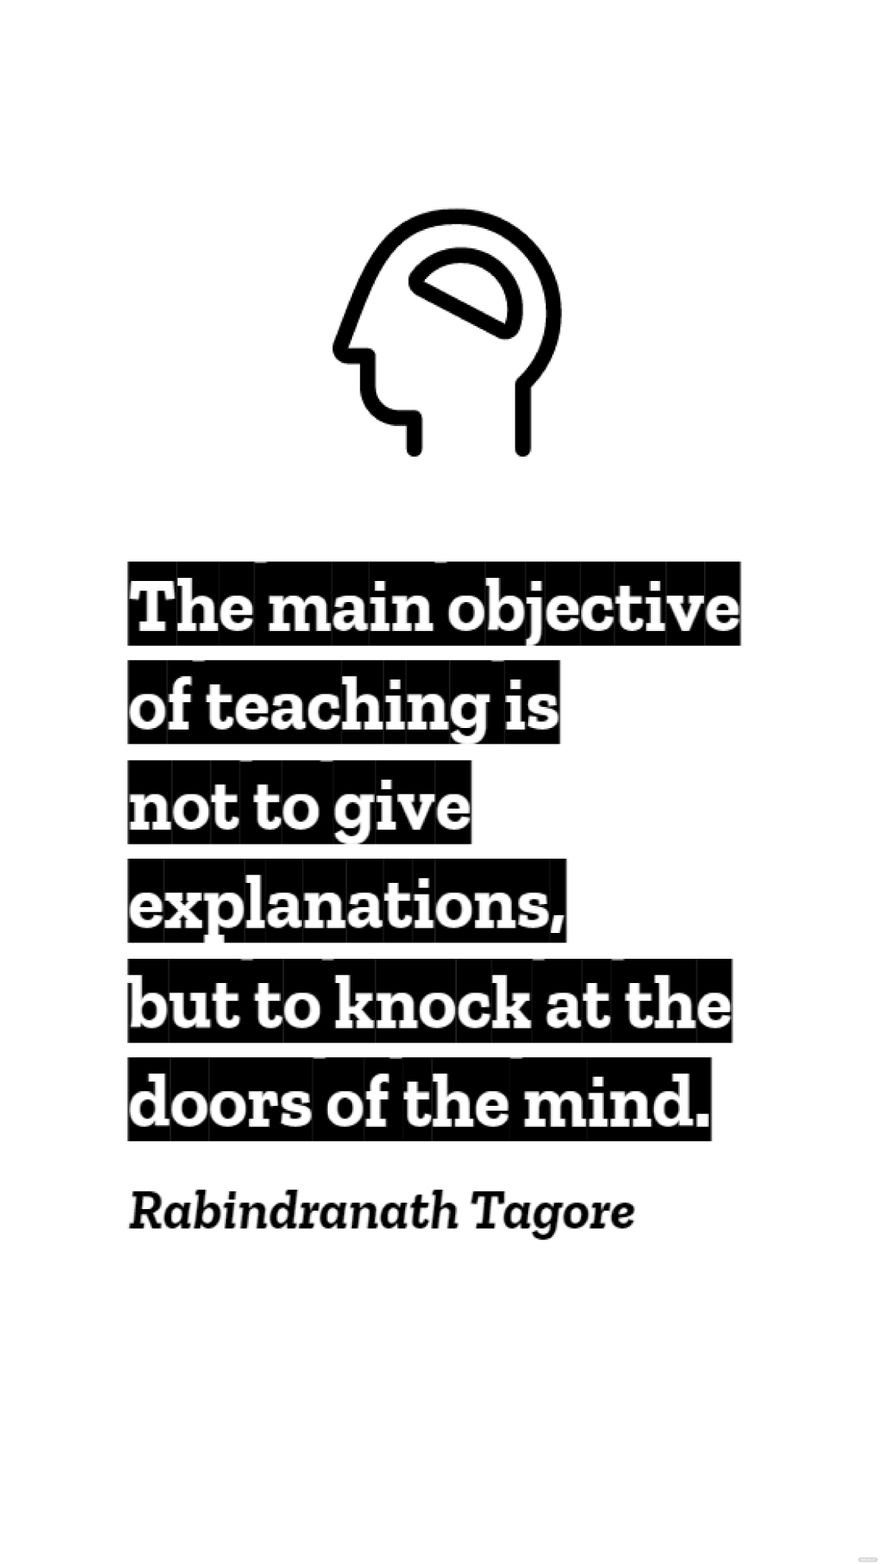 Rabindranath Tagore - The main objective of teaching is not to give explanations, but to knock at the doors of the mind.